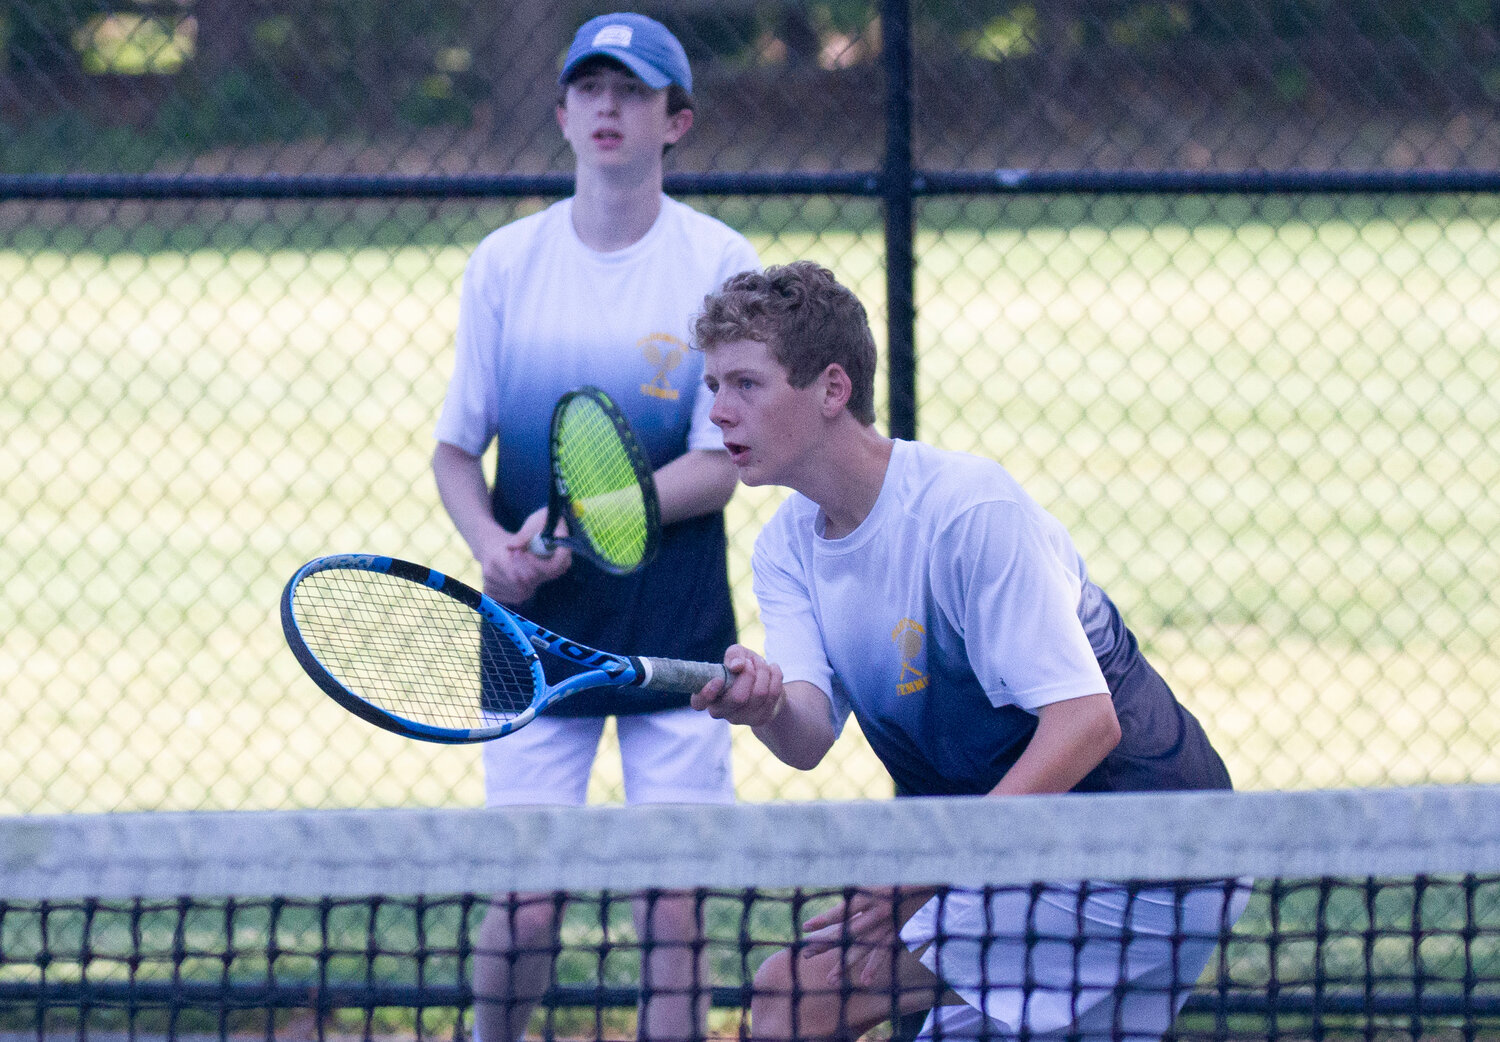 Gabe Anderson returns a shot during the playoff match against Mount St. Charles. Anderson's partner, Bryce Kupperman, stands nearby.